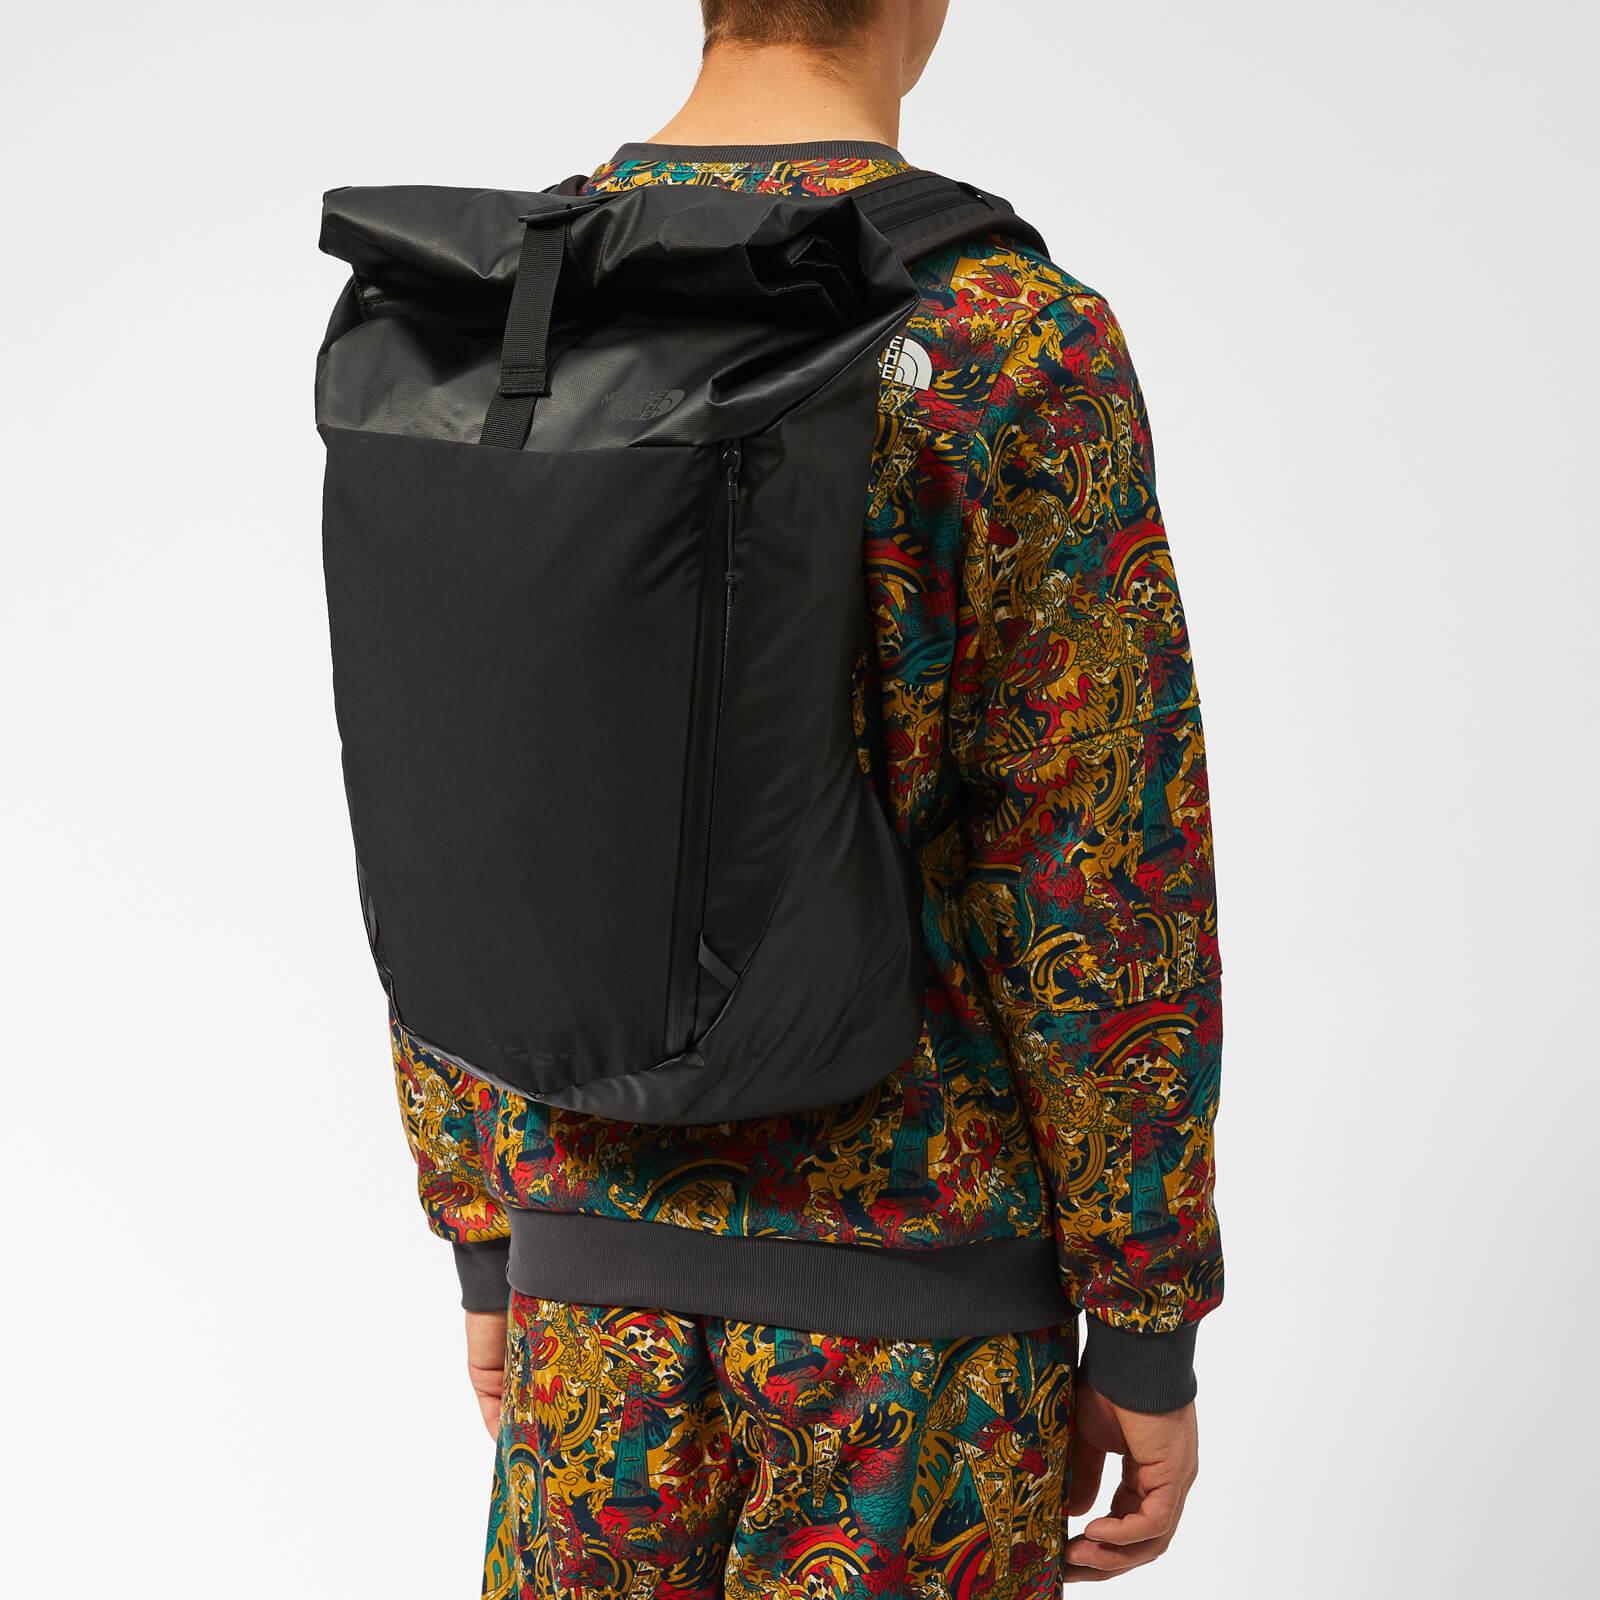 north face peckham backpack